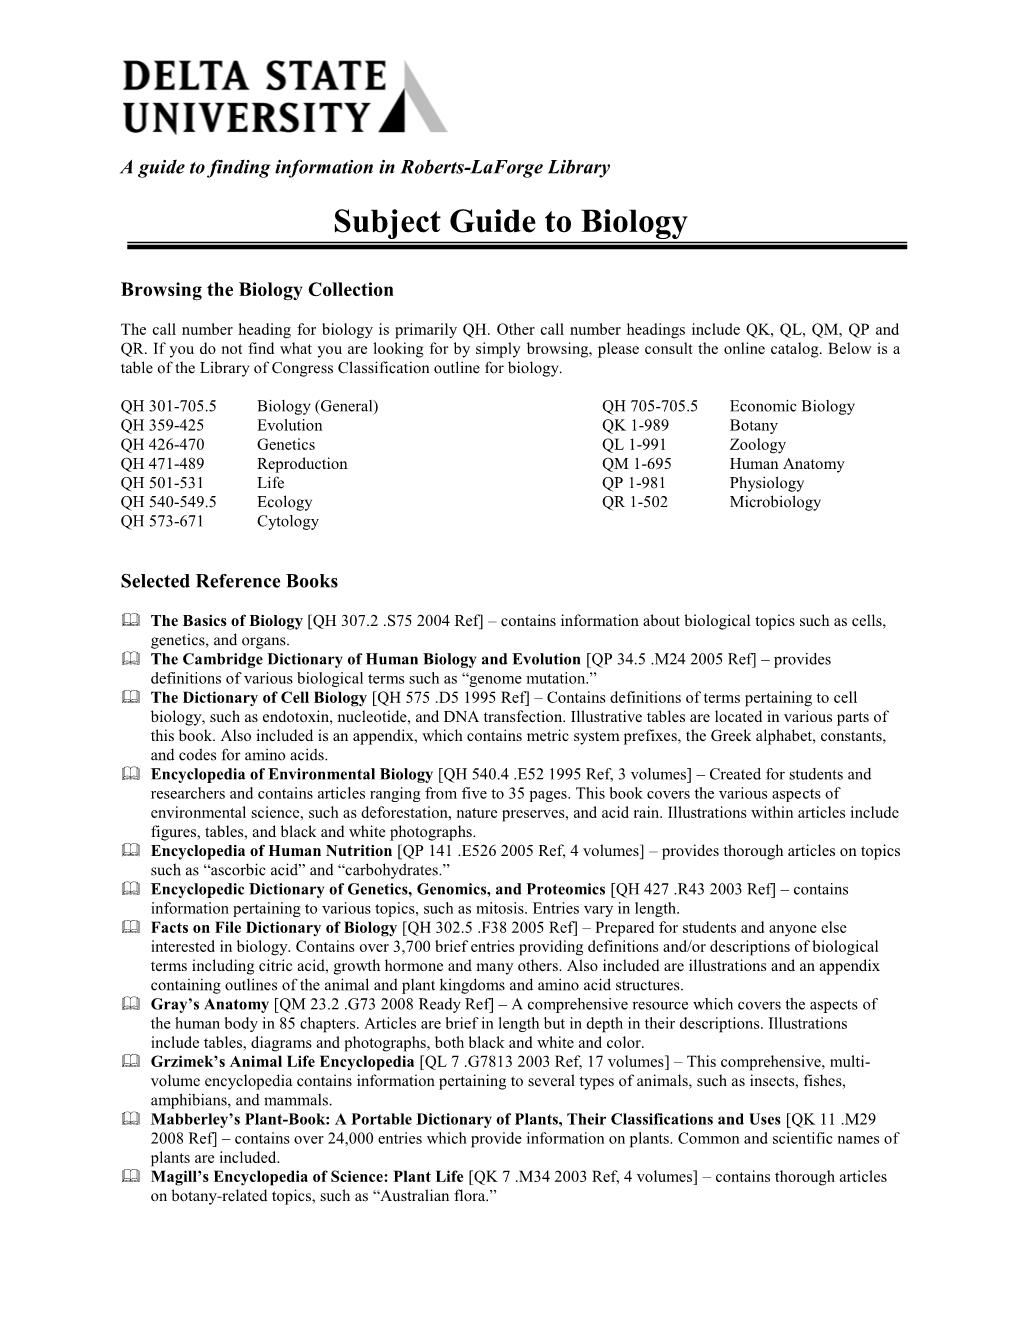 Subject Guide to Biology